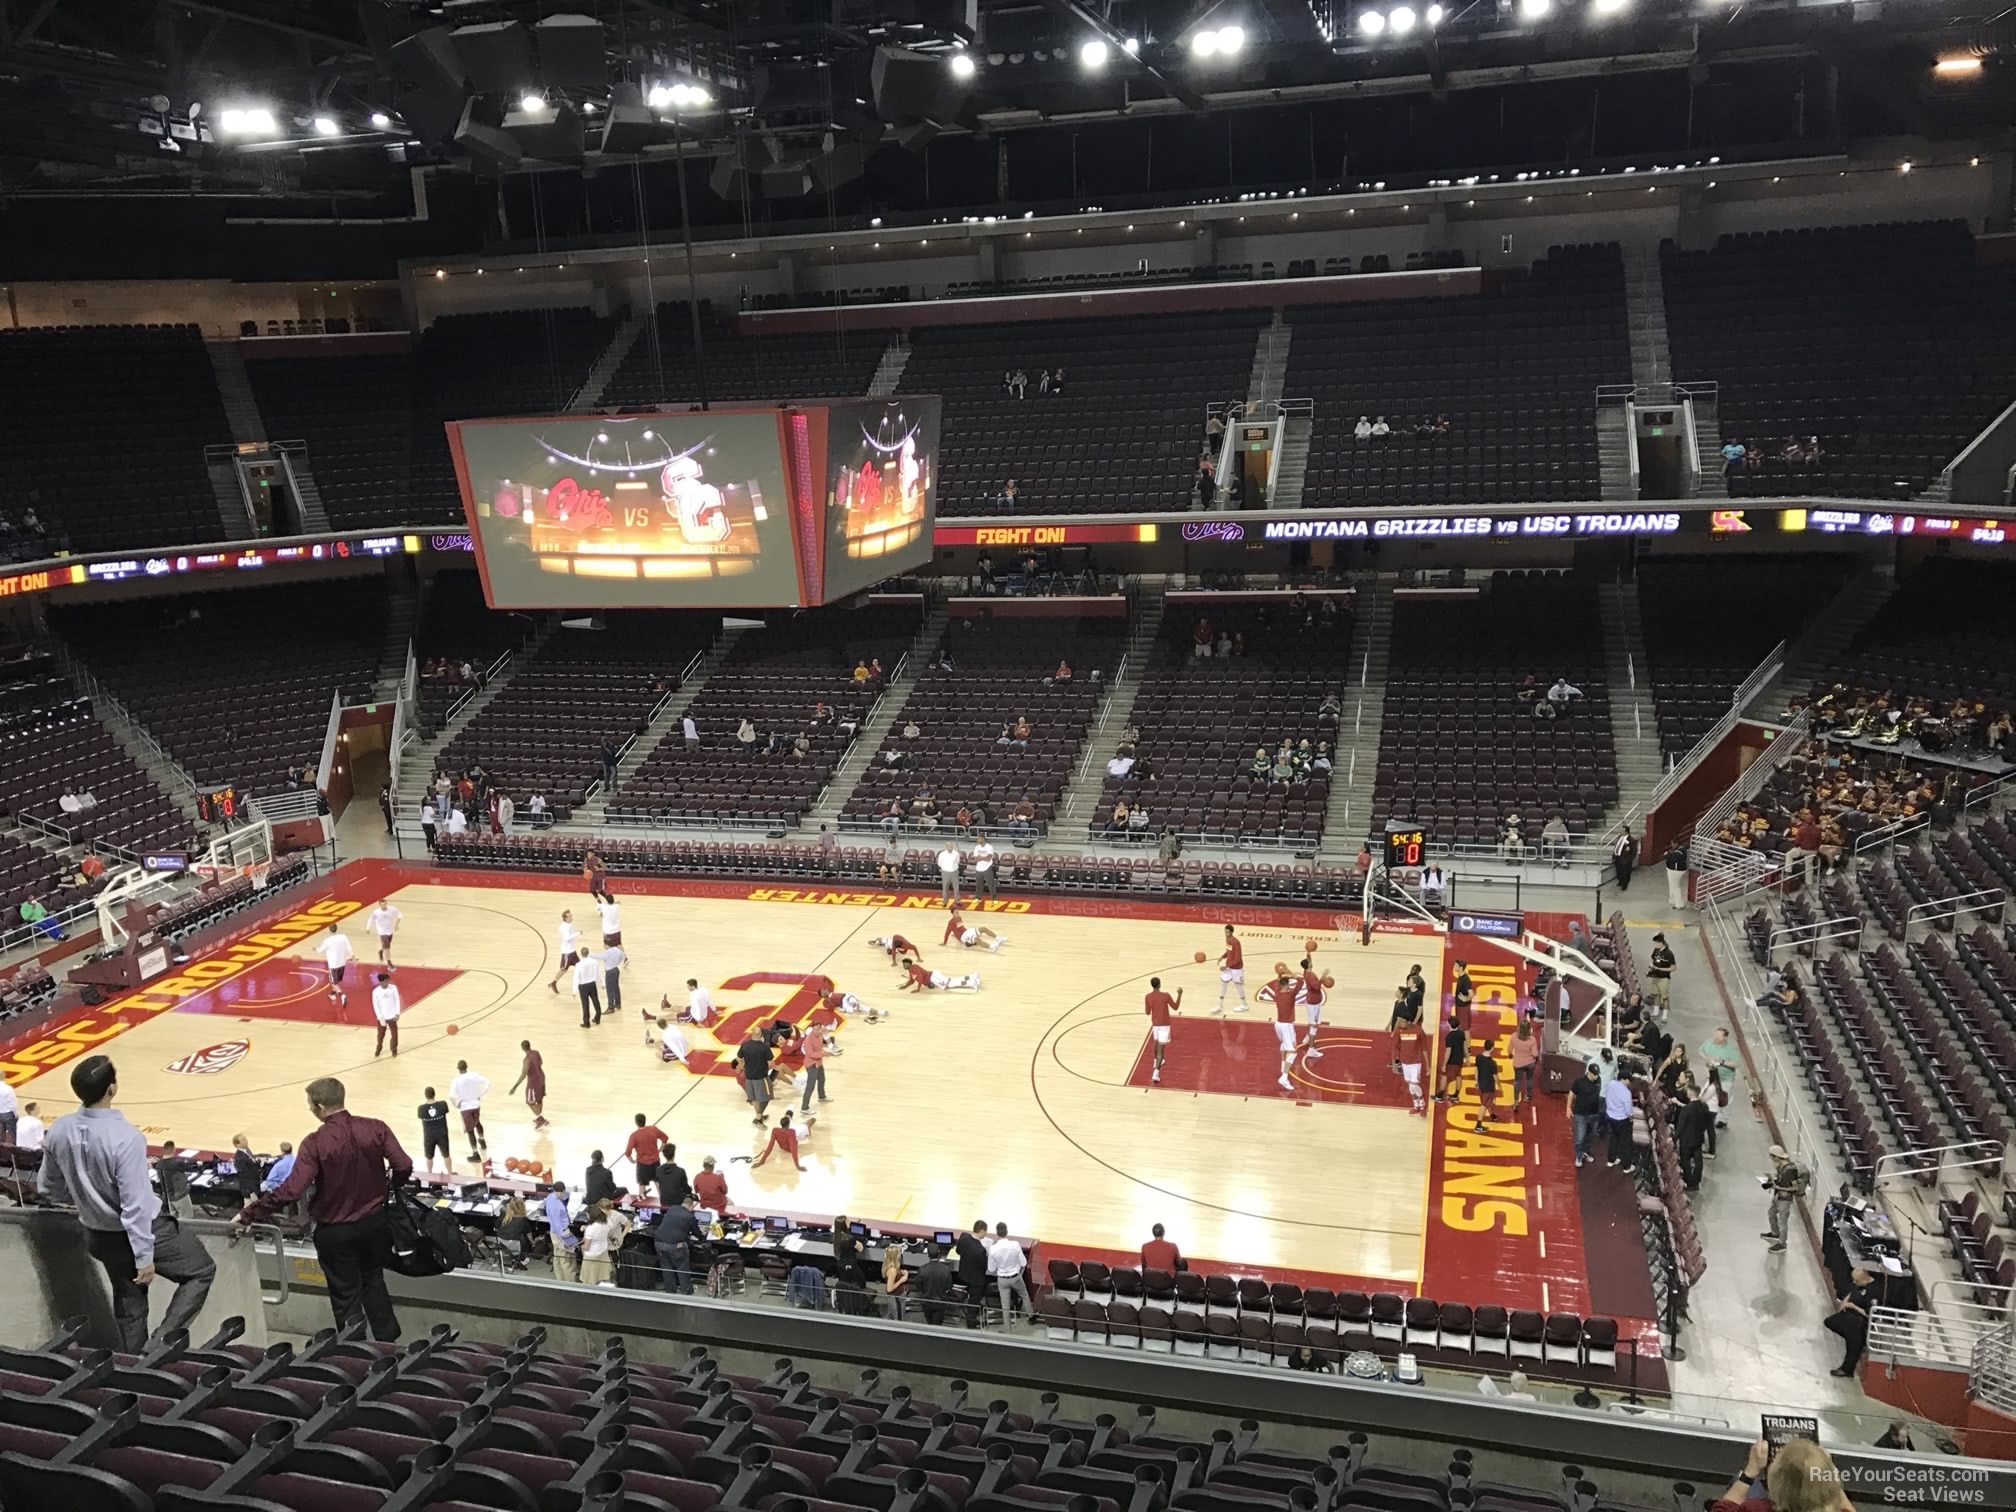 section 219, row 10 seat view  - galen center